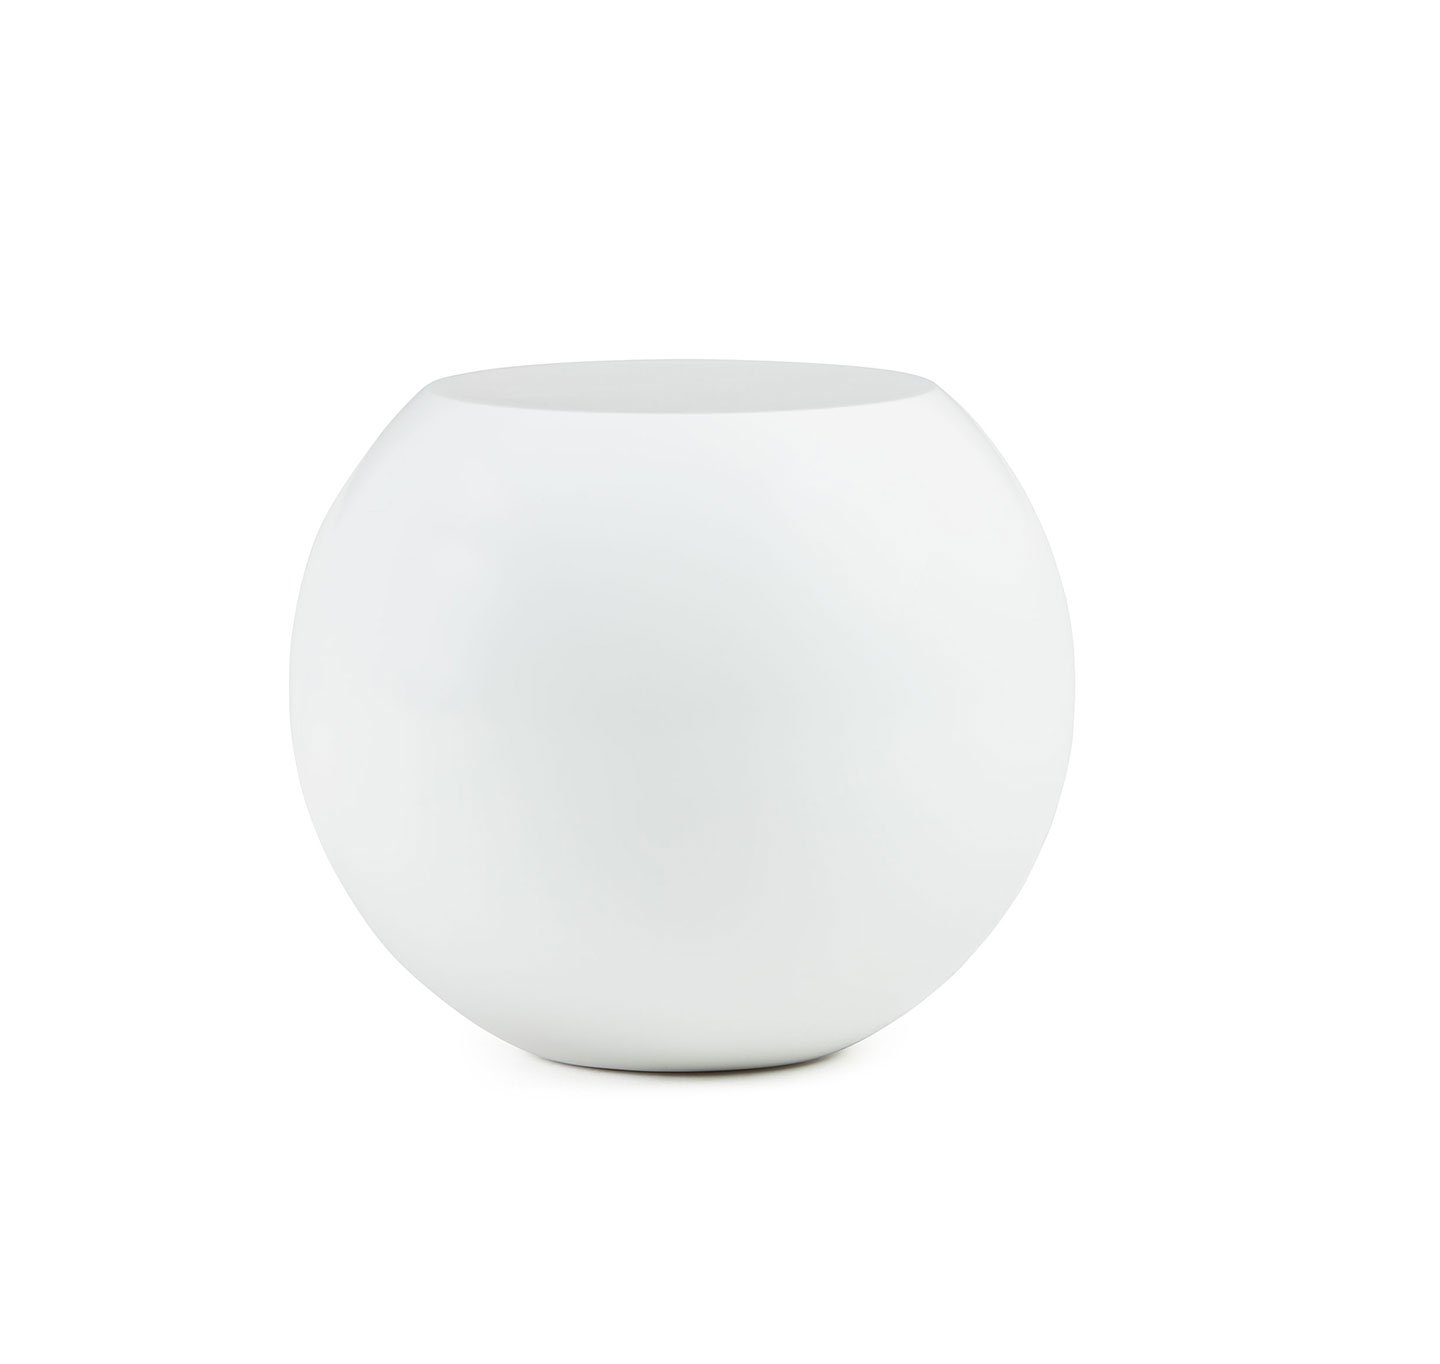 Haworth Bong side table in white